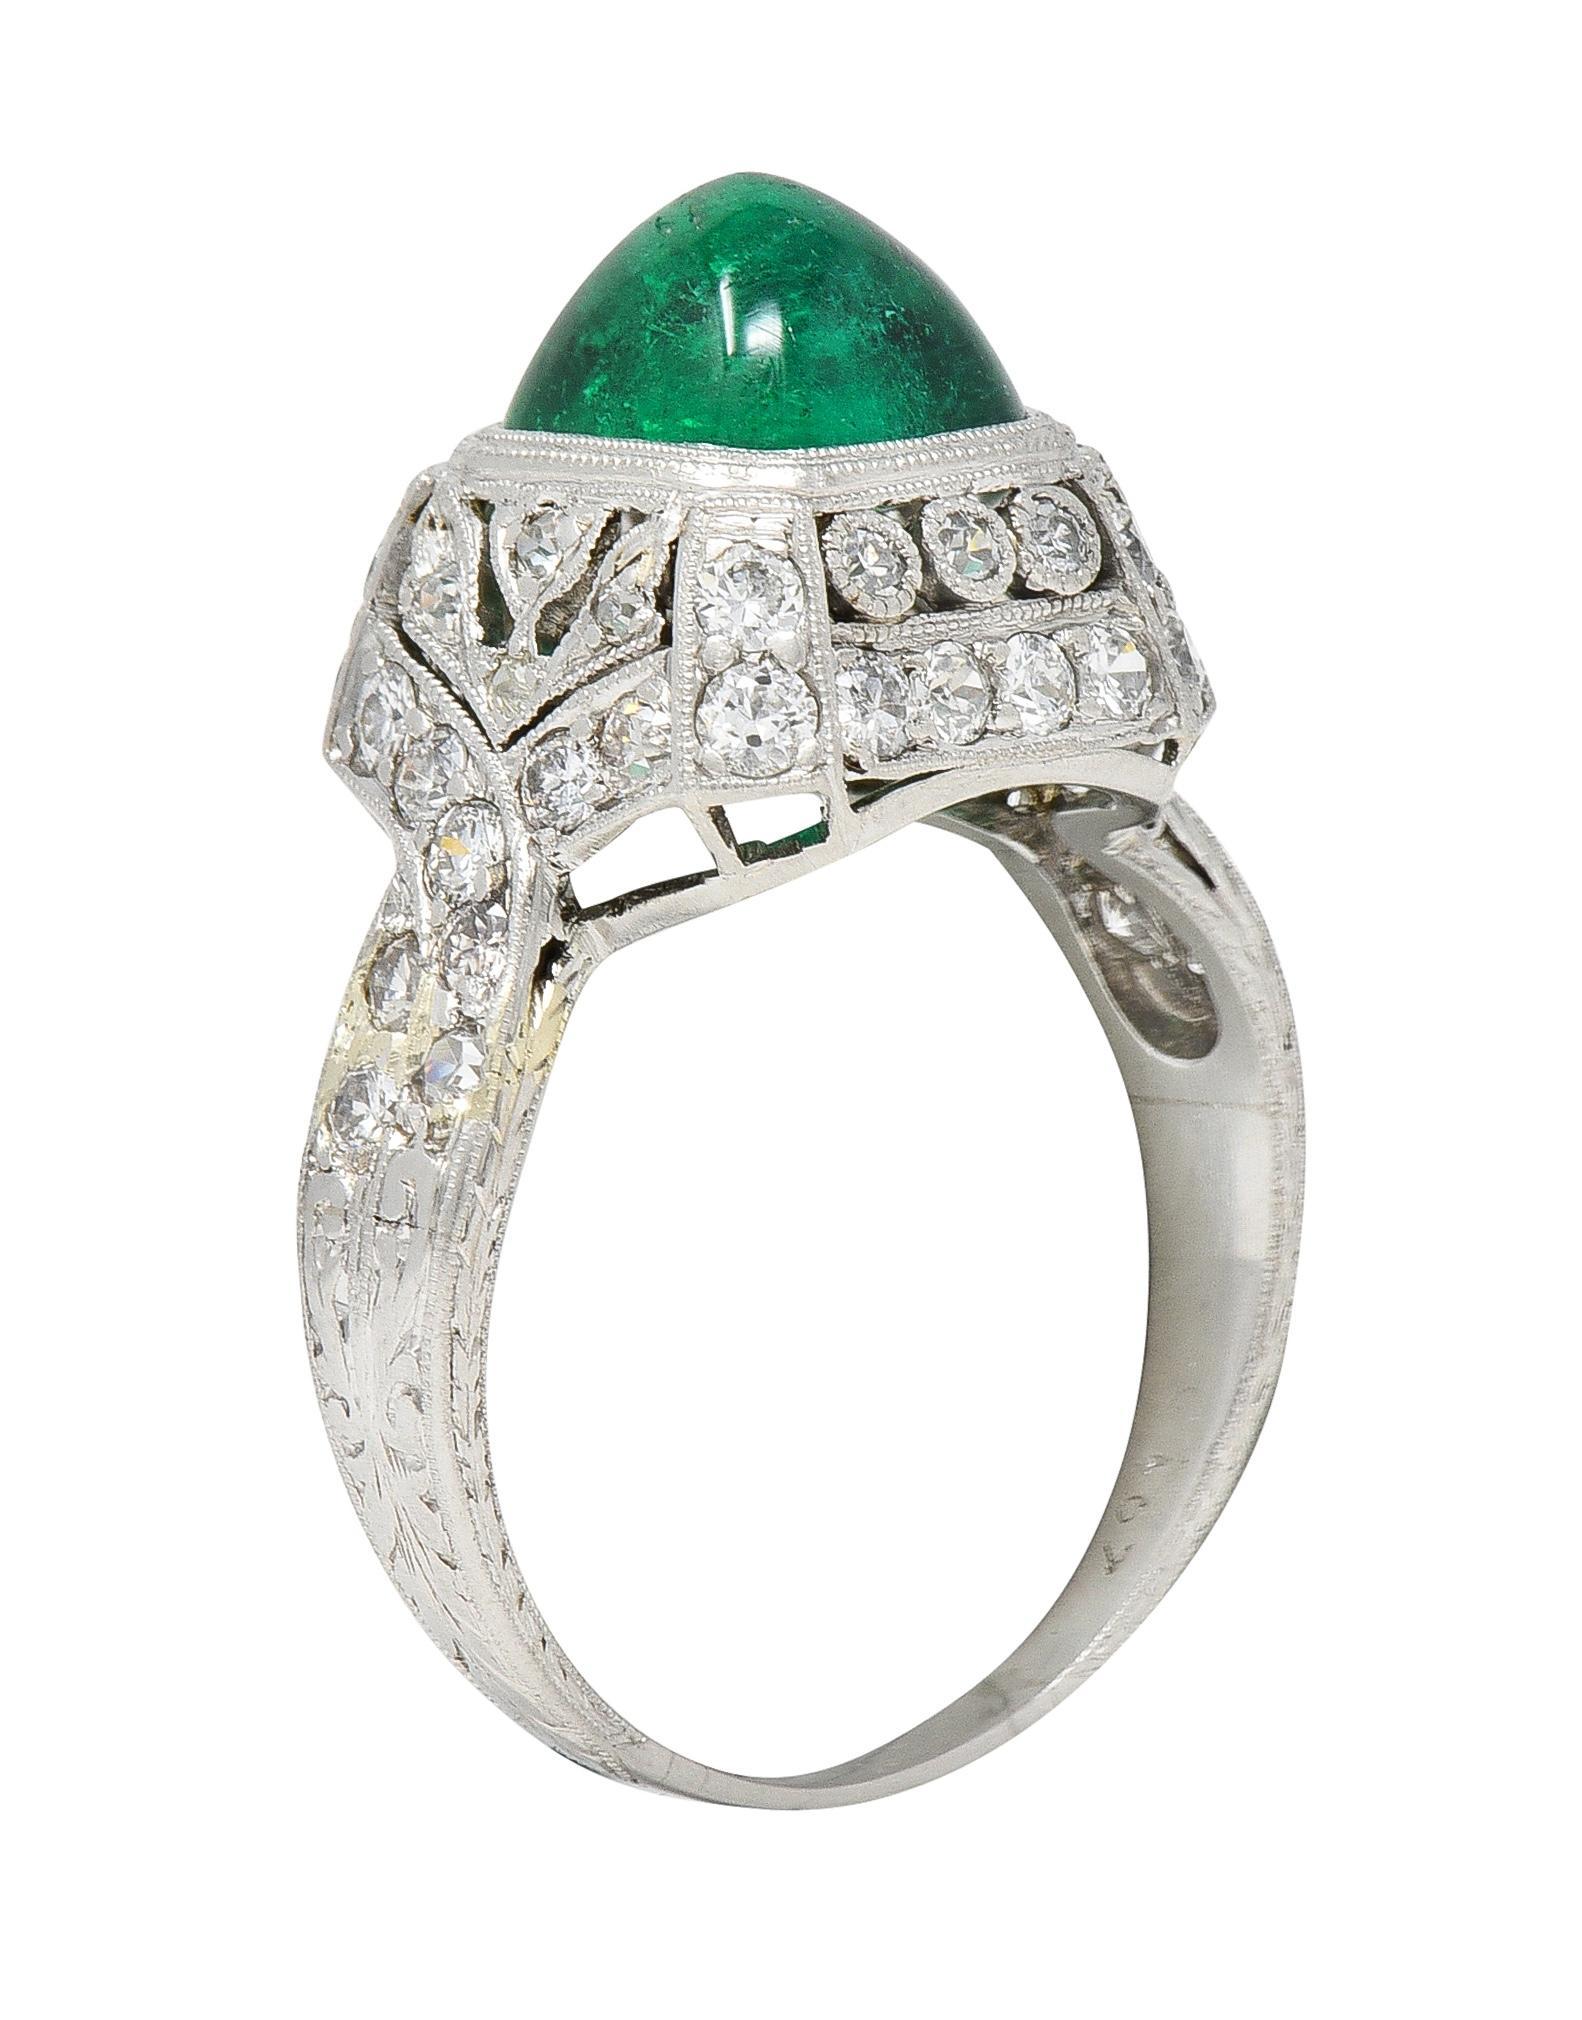 Centering a sugarloaf-shaped emerald cabochon weighing approximately 2.71 carats total 
Transparent vibrant medium green in color - bezel set in domed cushion-shaped surround 
Accented by pierced ribbon and tulip motifs set with single cut diamonds